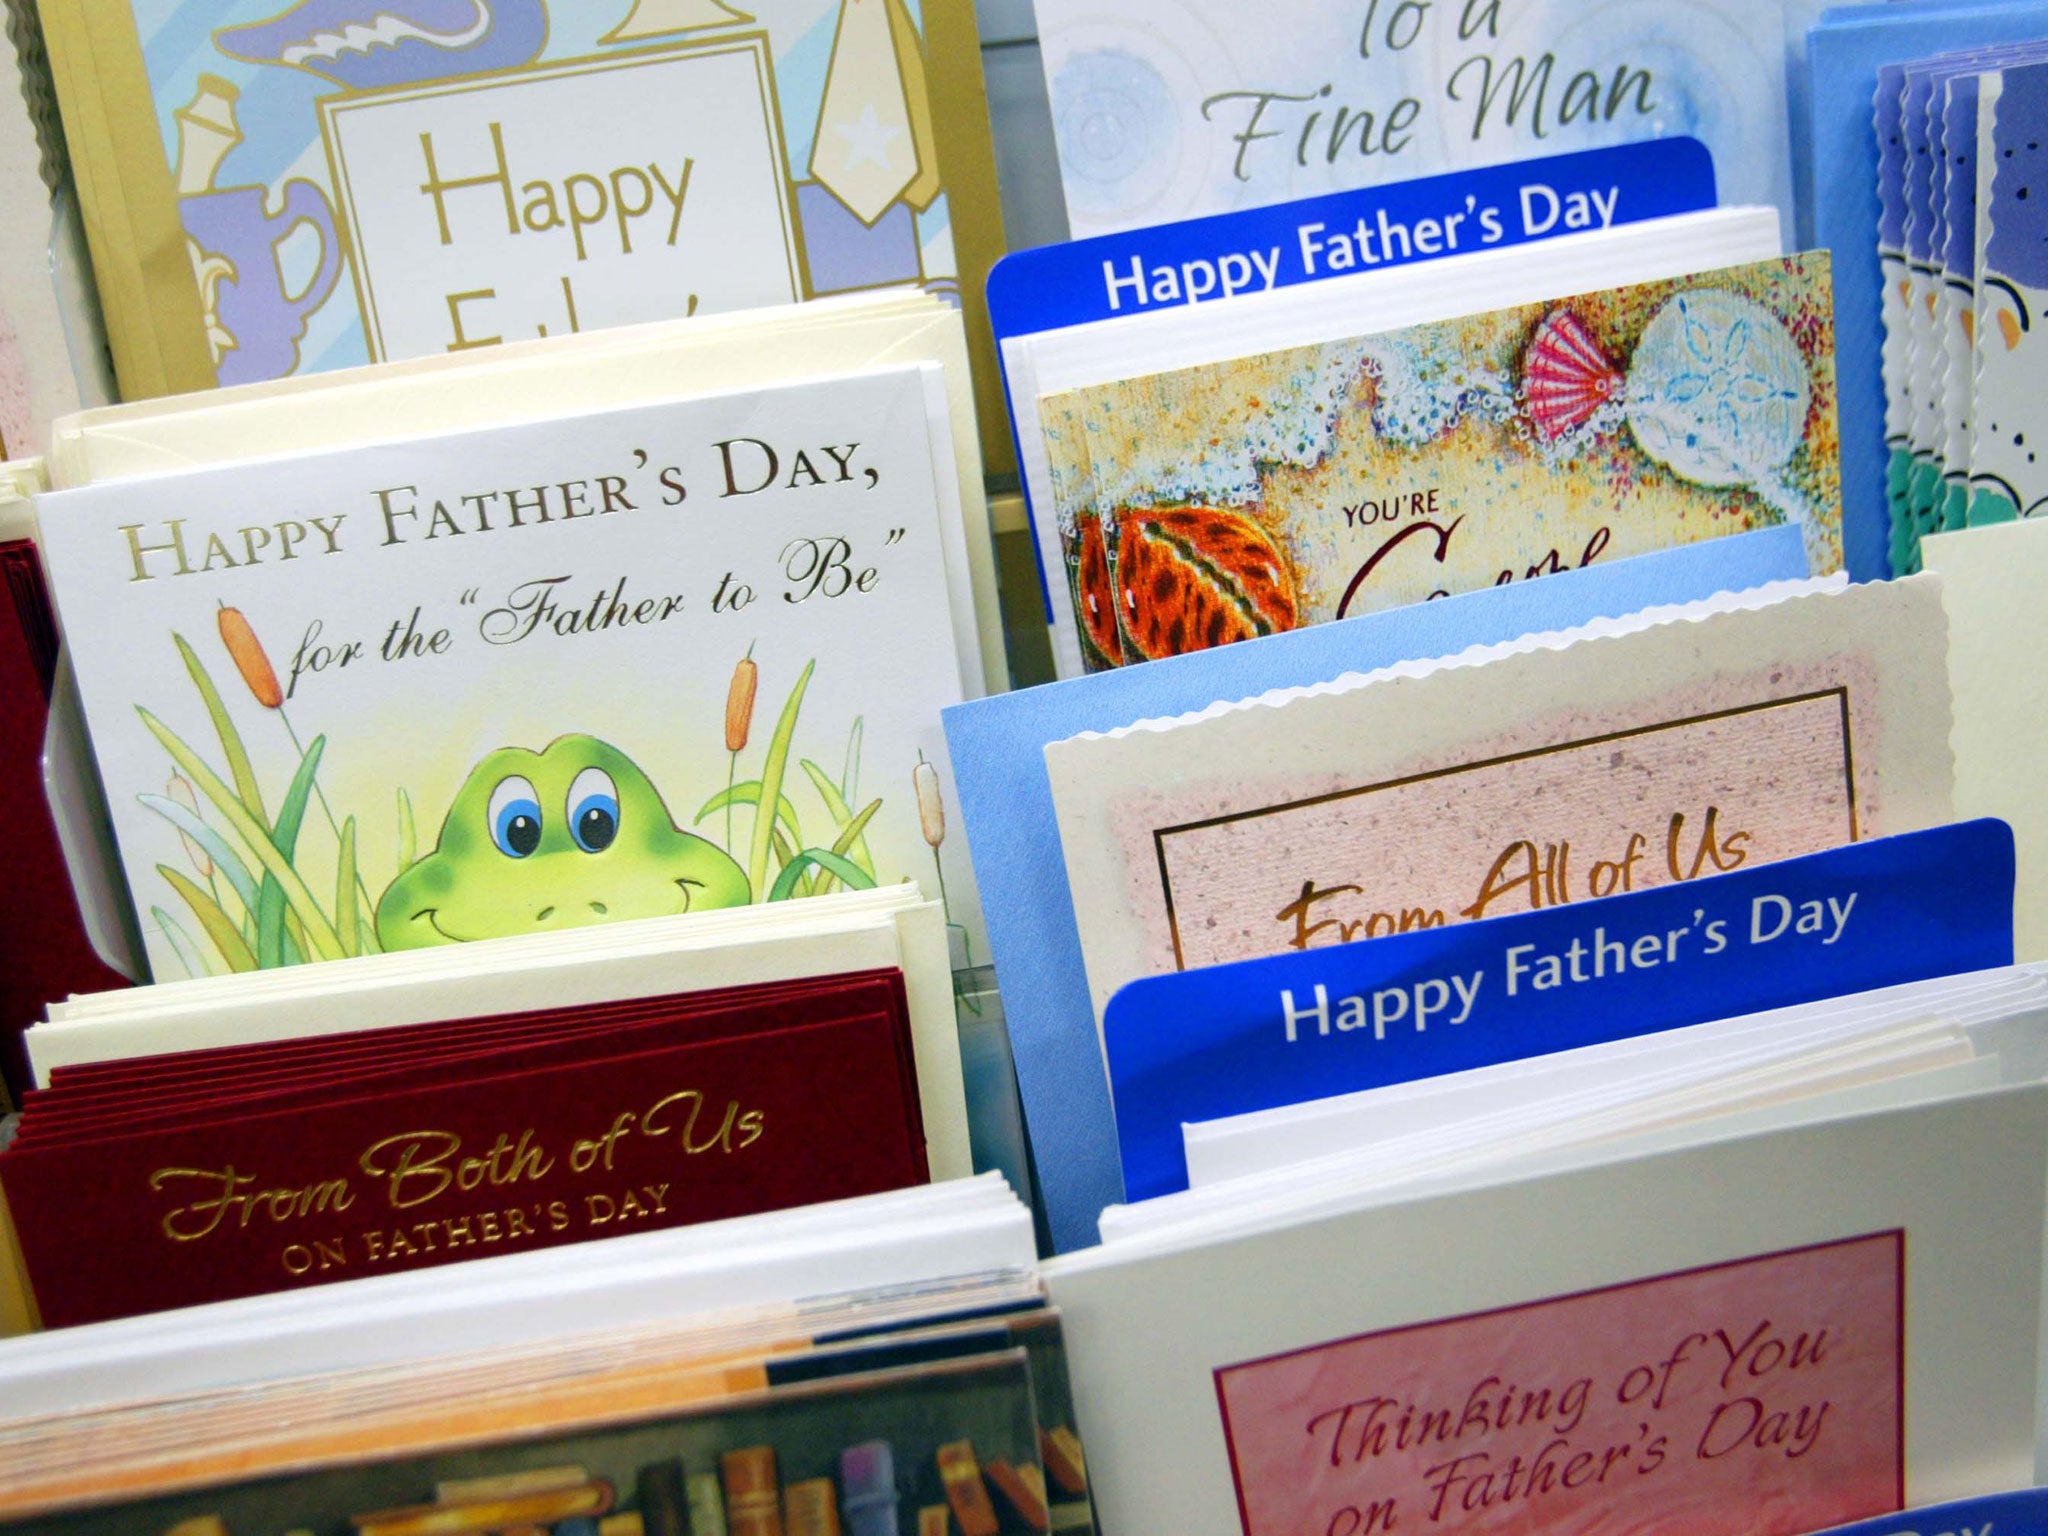 Father's Day cards on the shelf